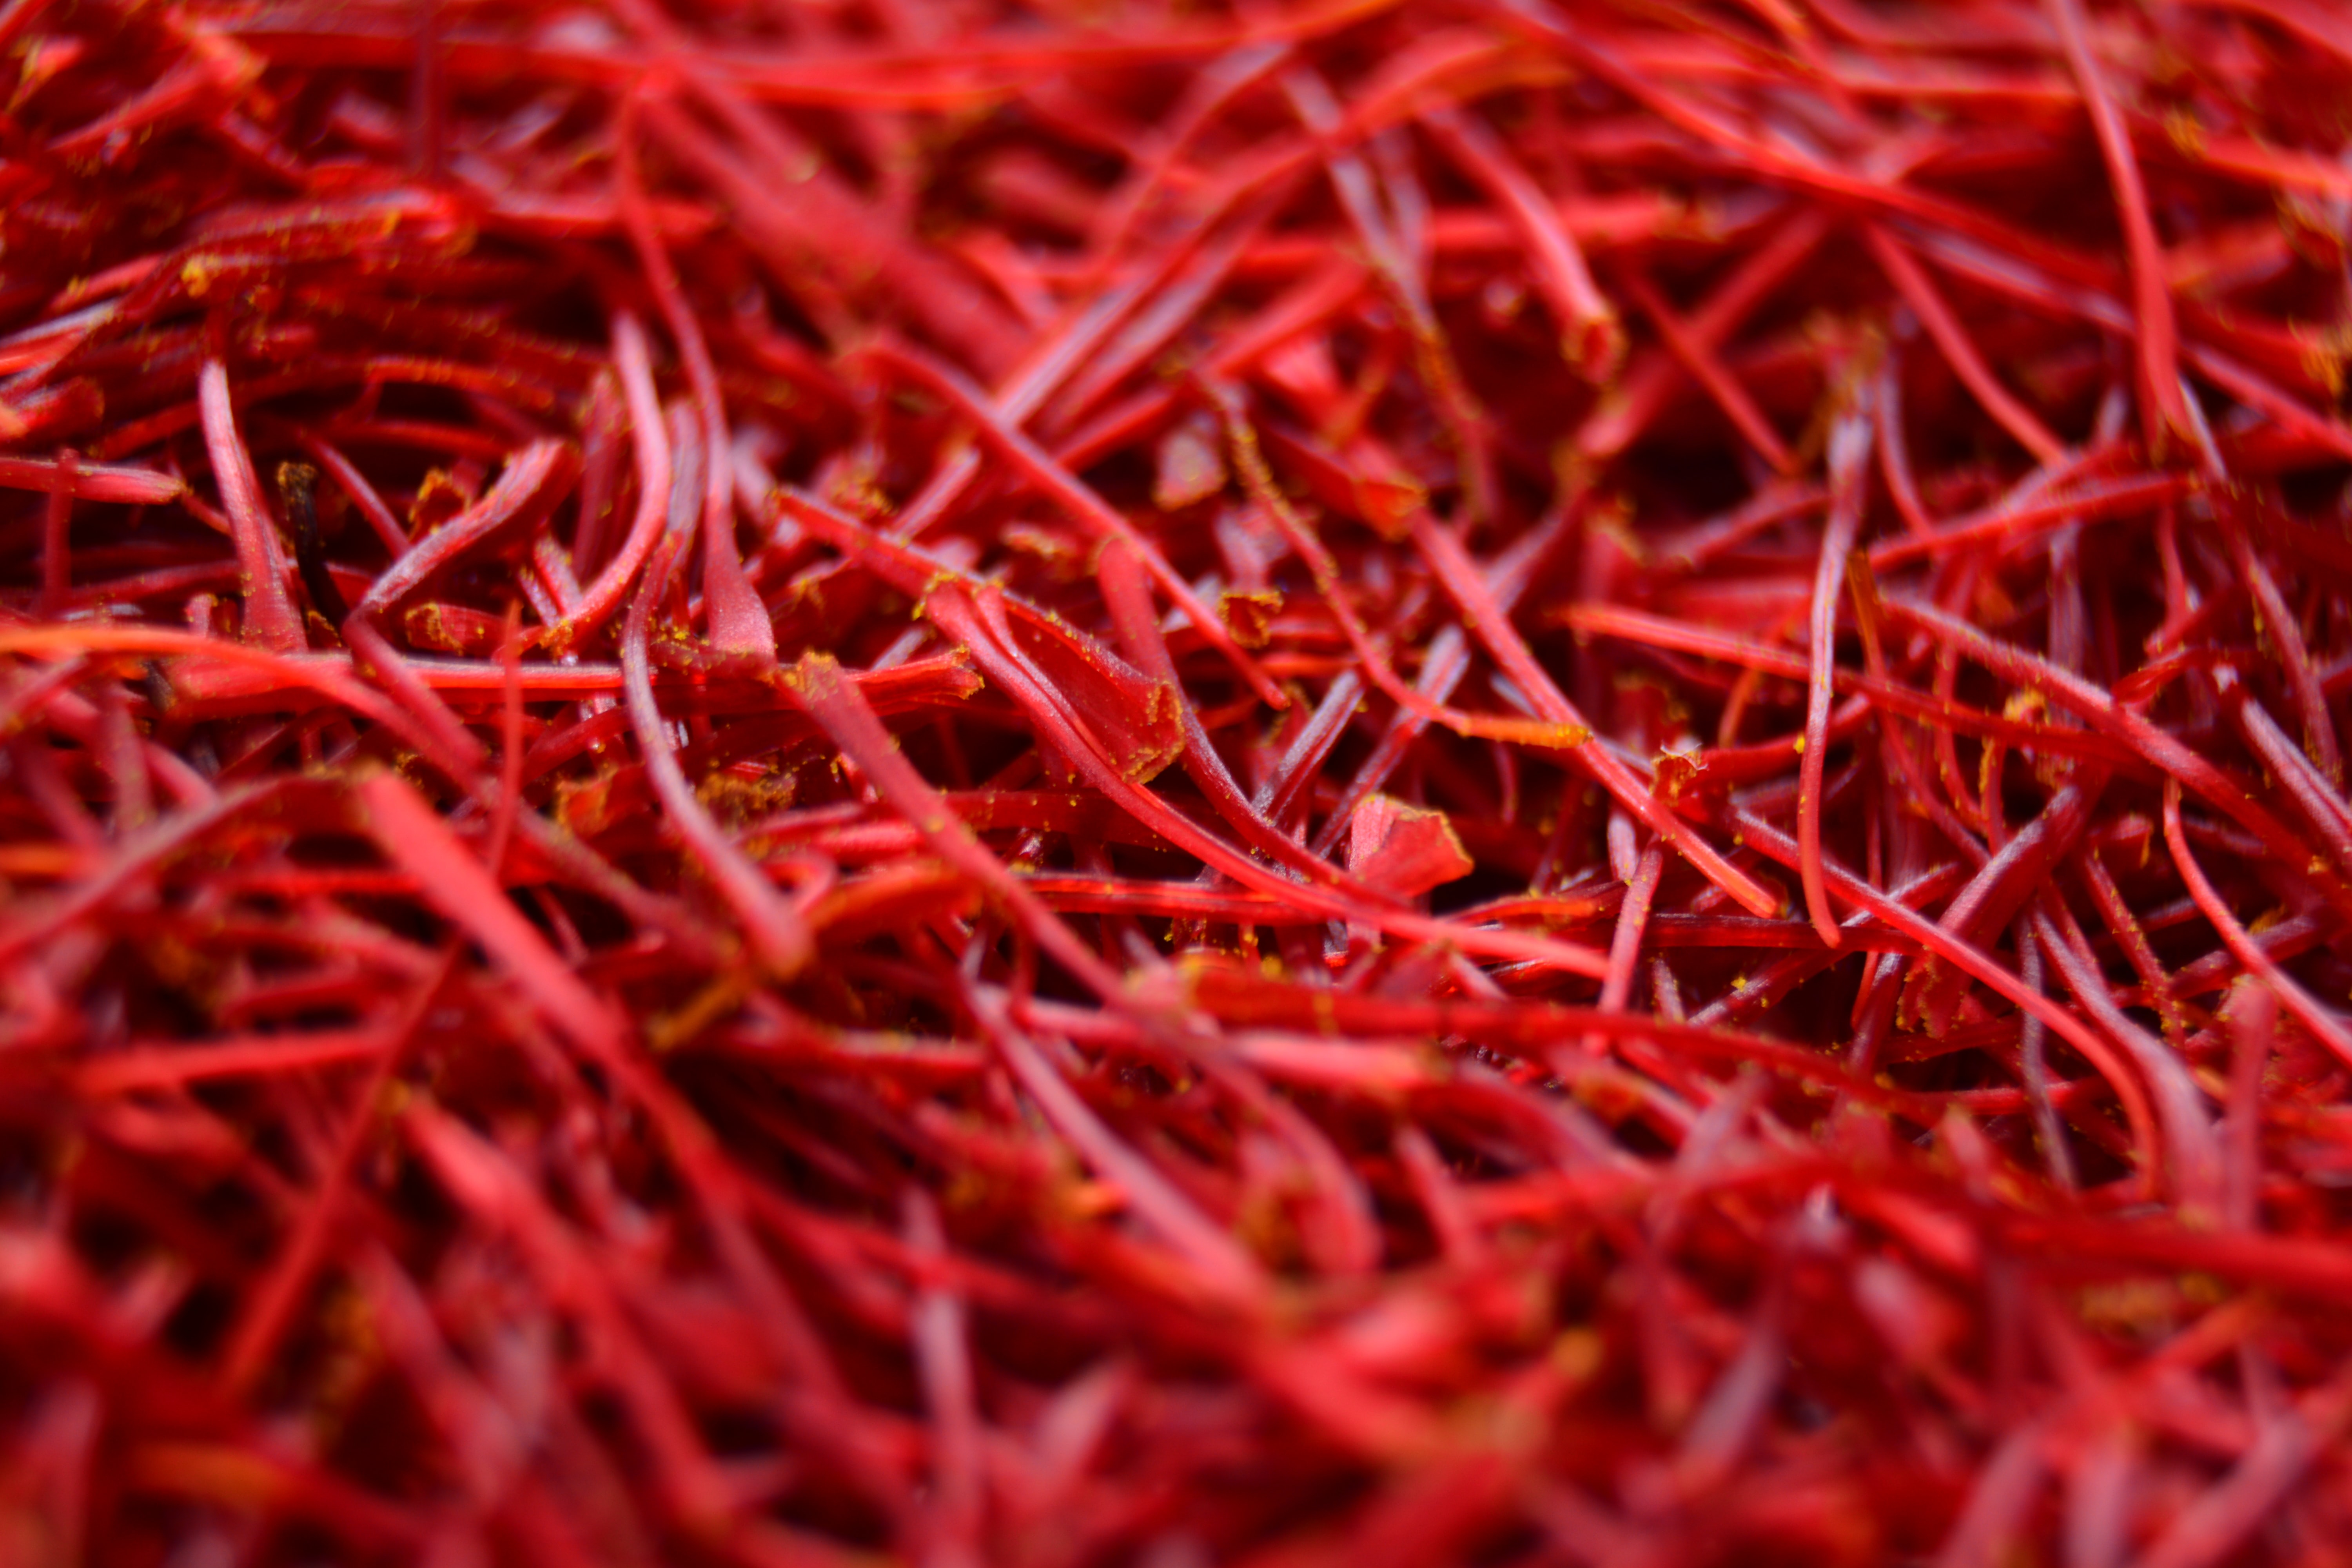 Considering its high price, it seems unlikely that most people would incorporate large amounts of saffron into their diet.  However, we cannot fail to point out that this particular spice contains up to 1.7 grams of potassium per 100 grams.